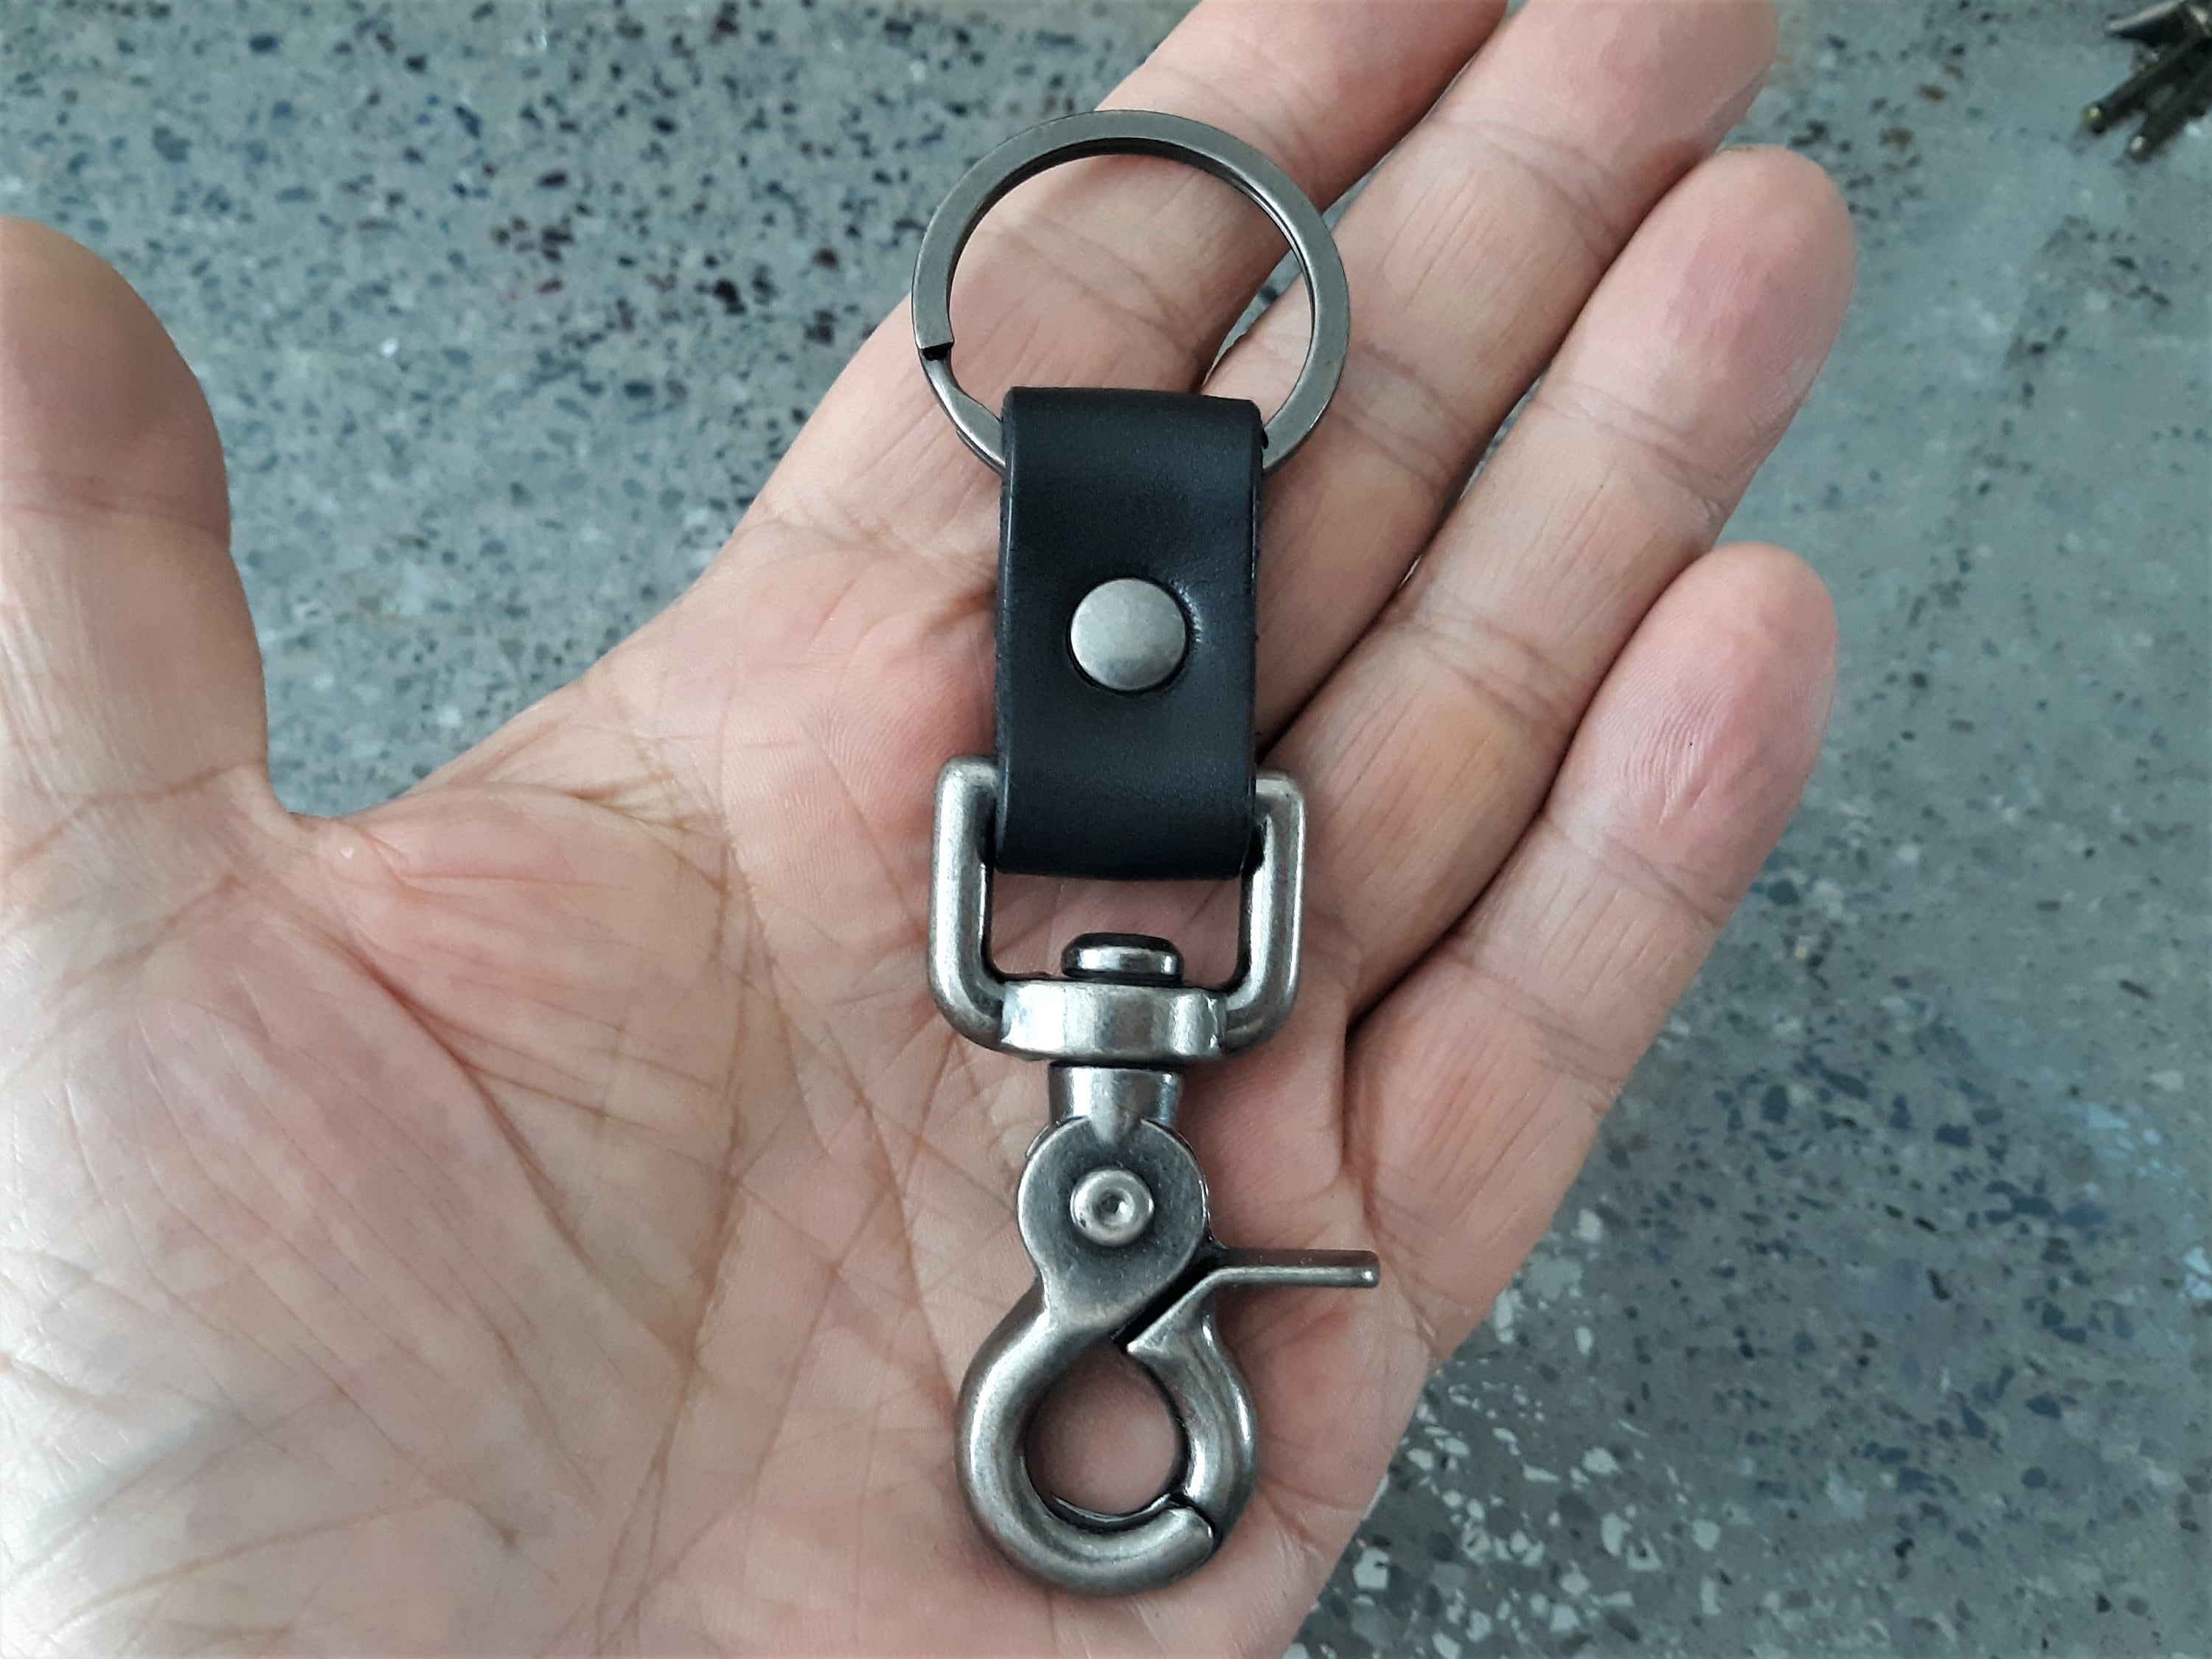 KEY-BAK Large Trigger Snap Key Chain Accessory with 1.125 inch Split Ring